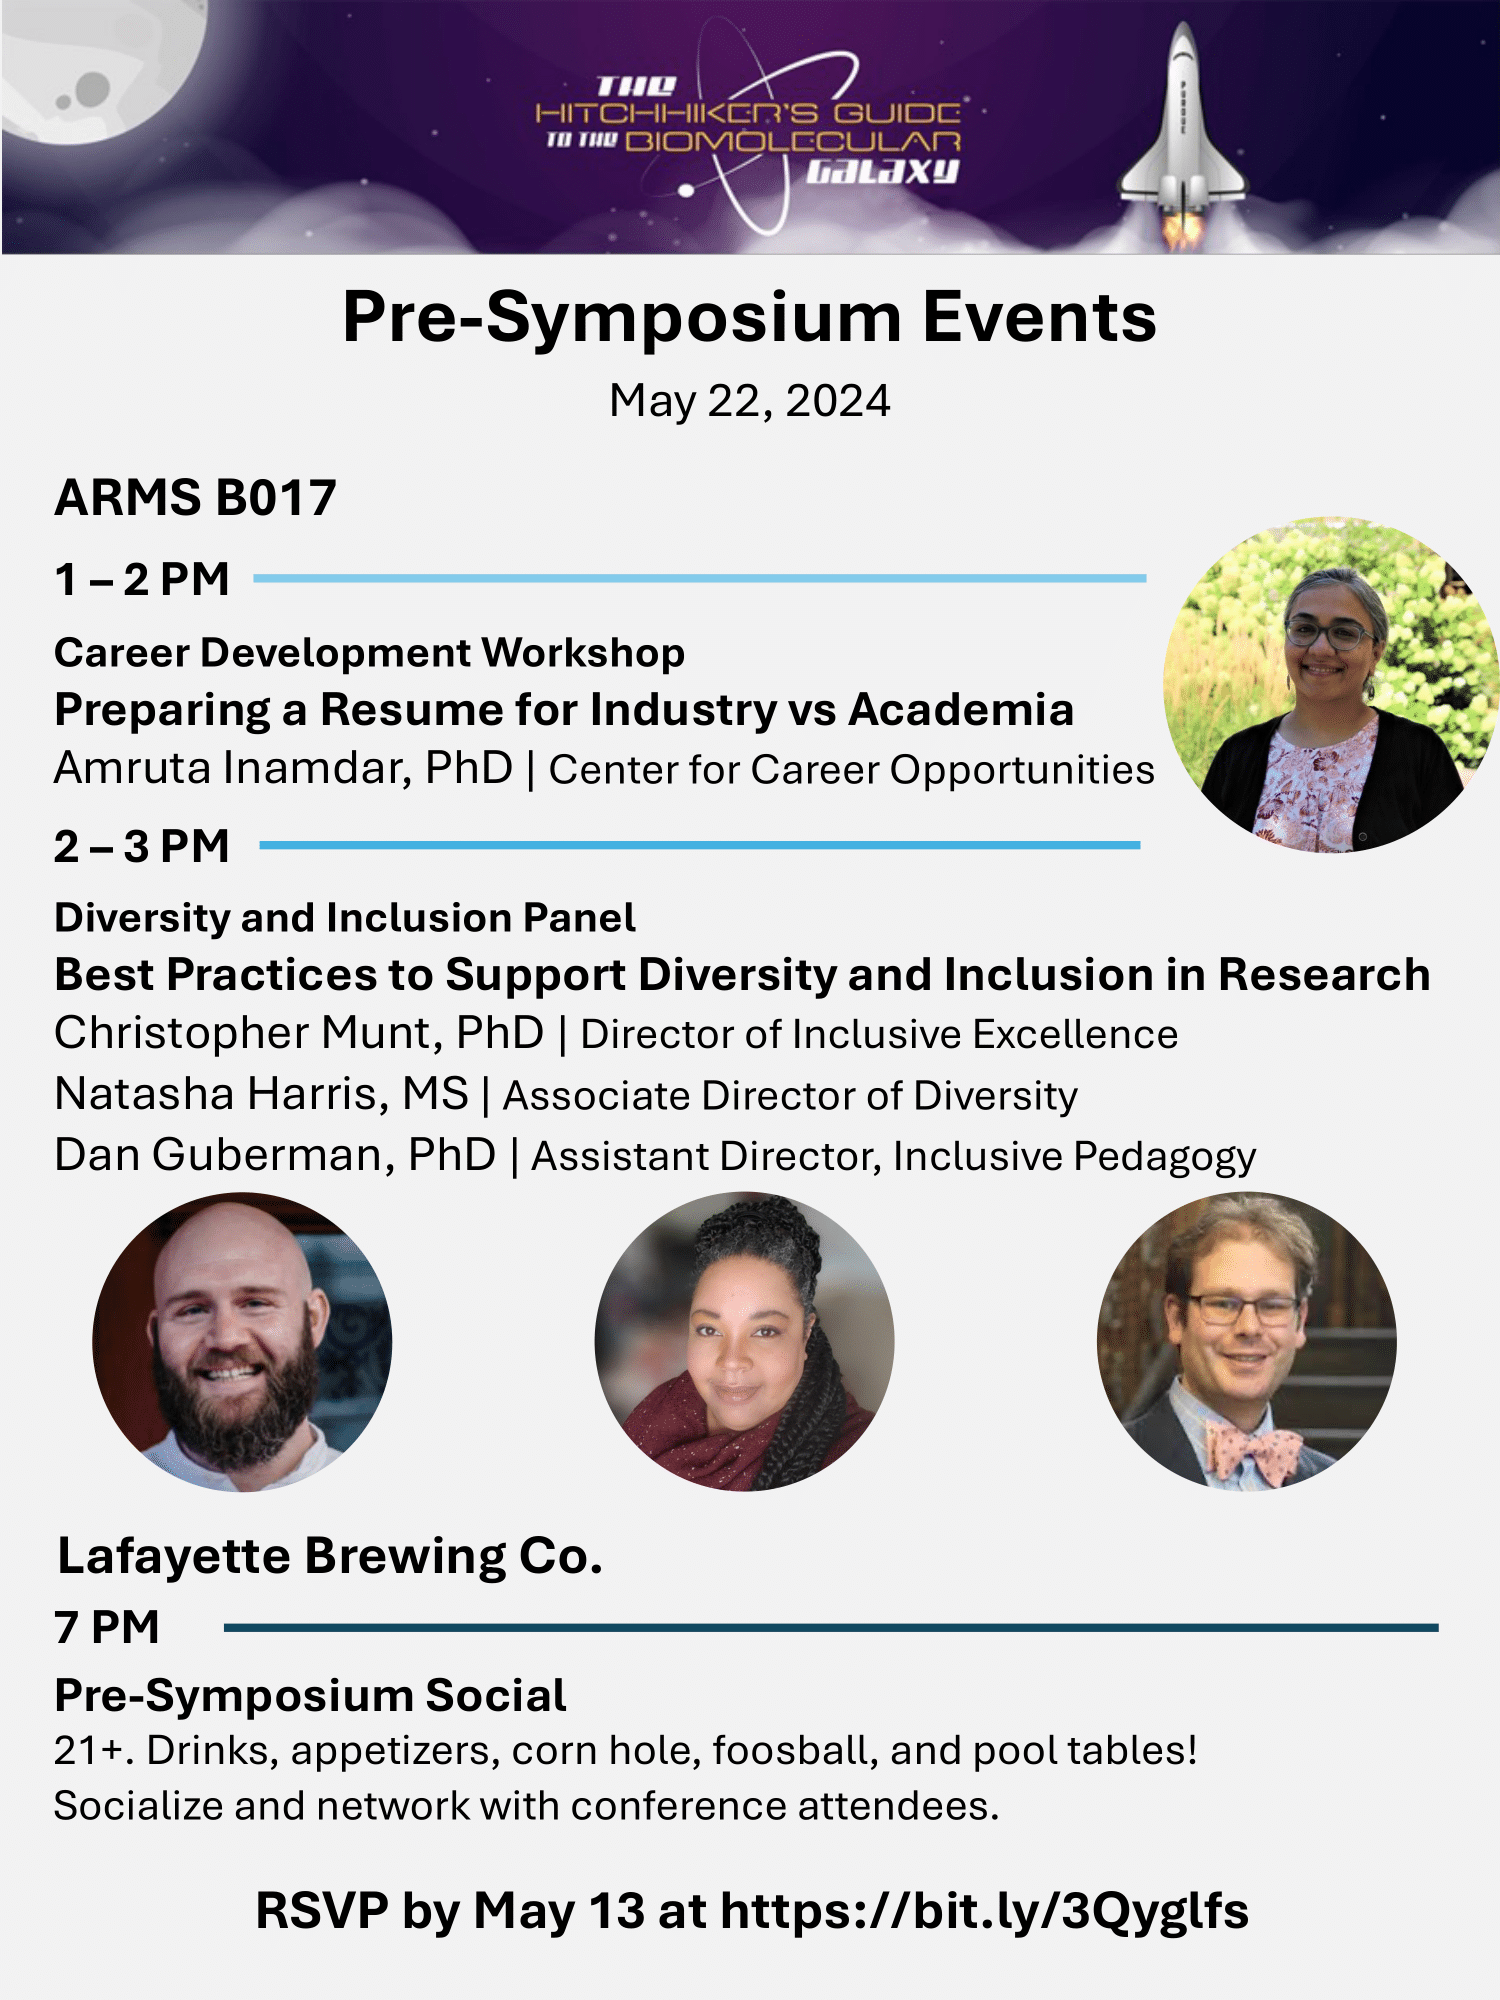 presymposium-event-poster_headshots-1-1.png